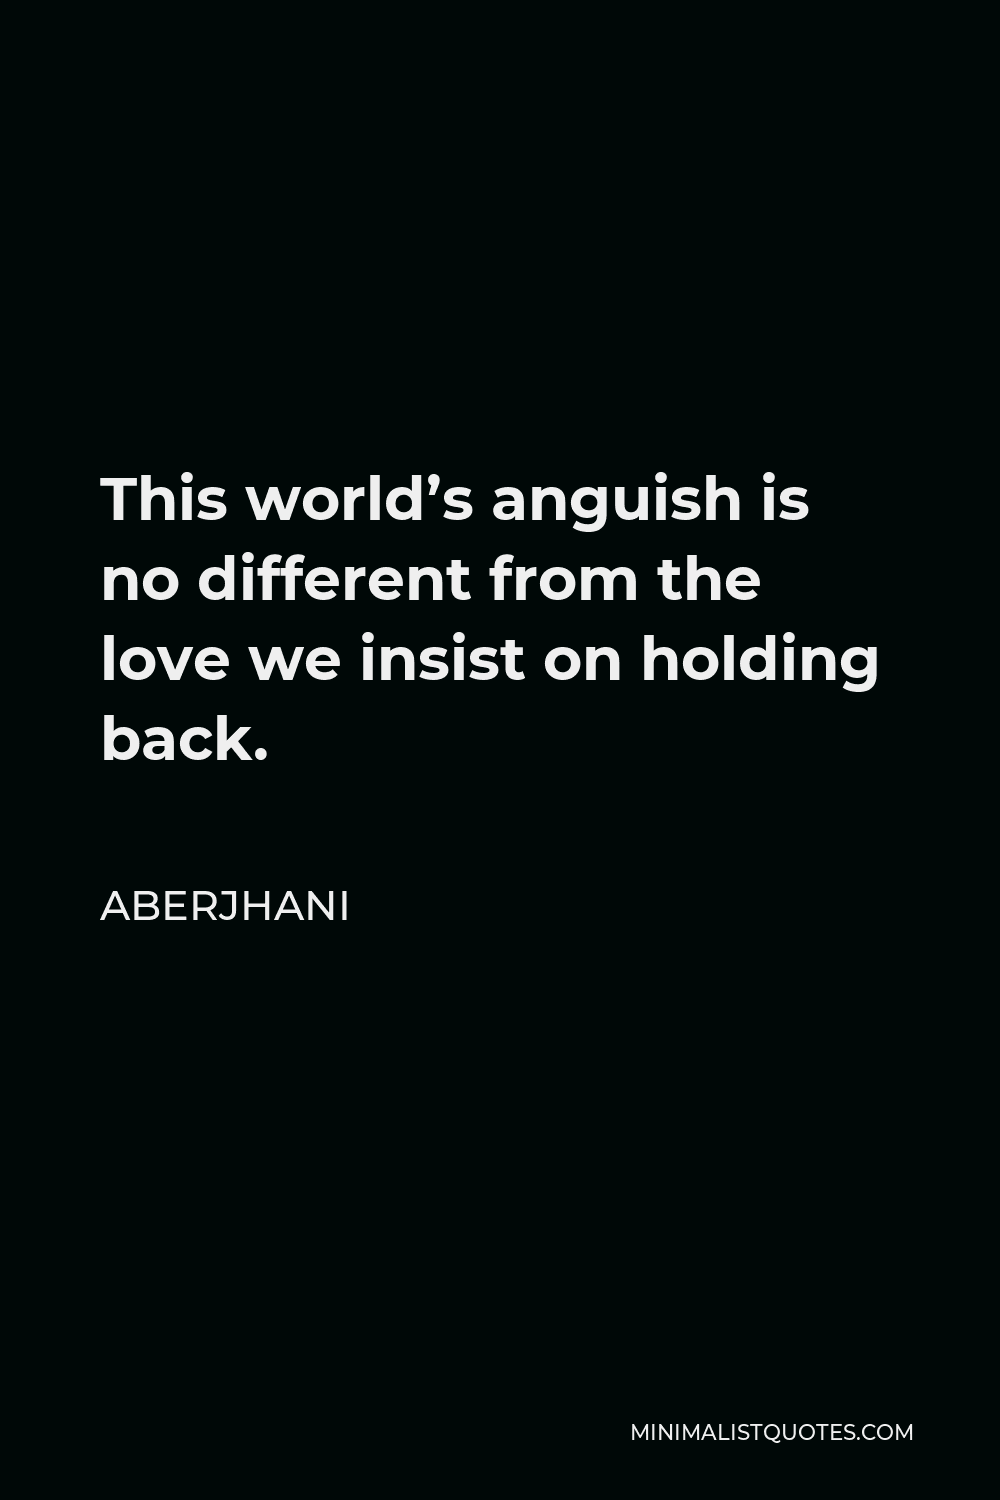 Aberjhani Quote - This world’s anguish is no different from the love we insist on holding back.